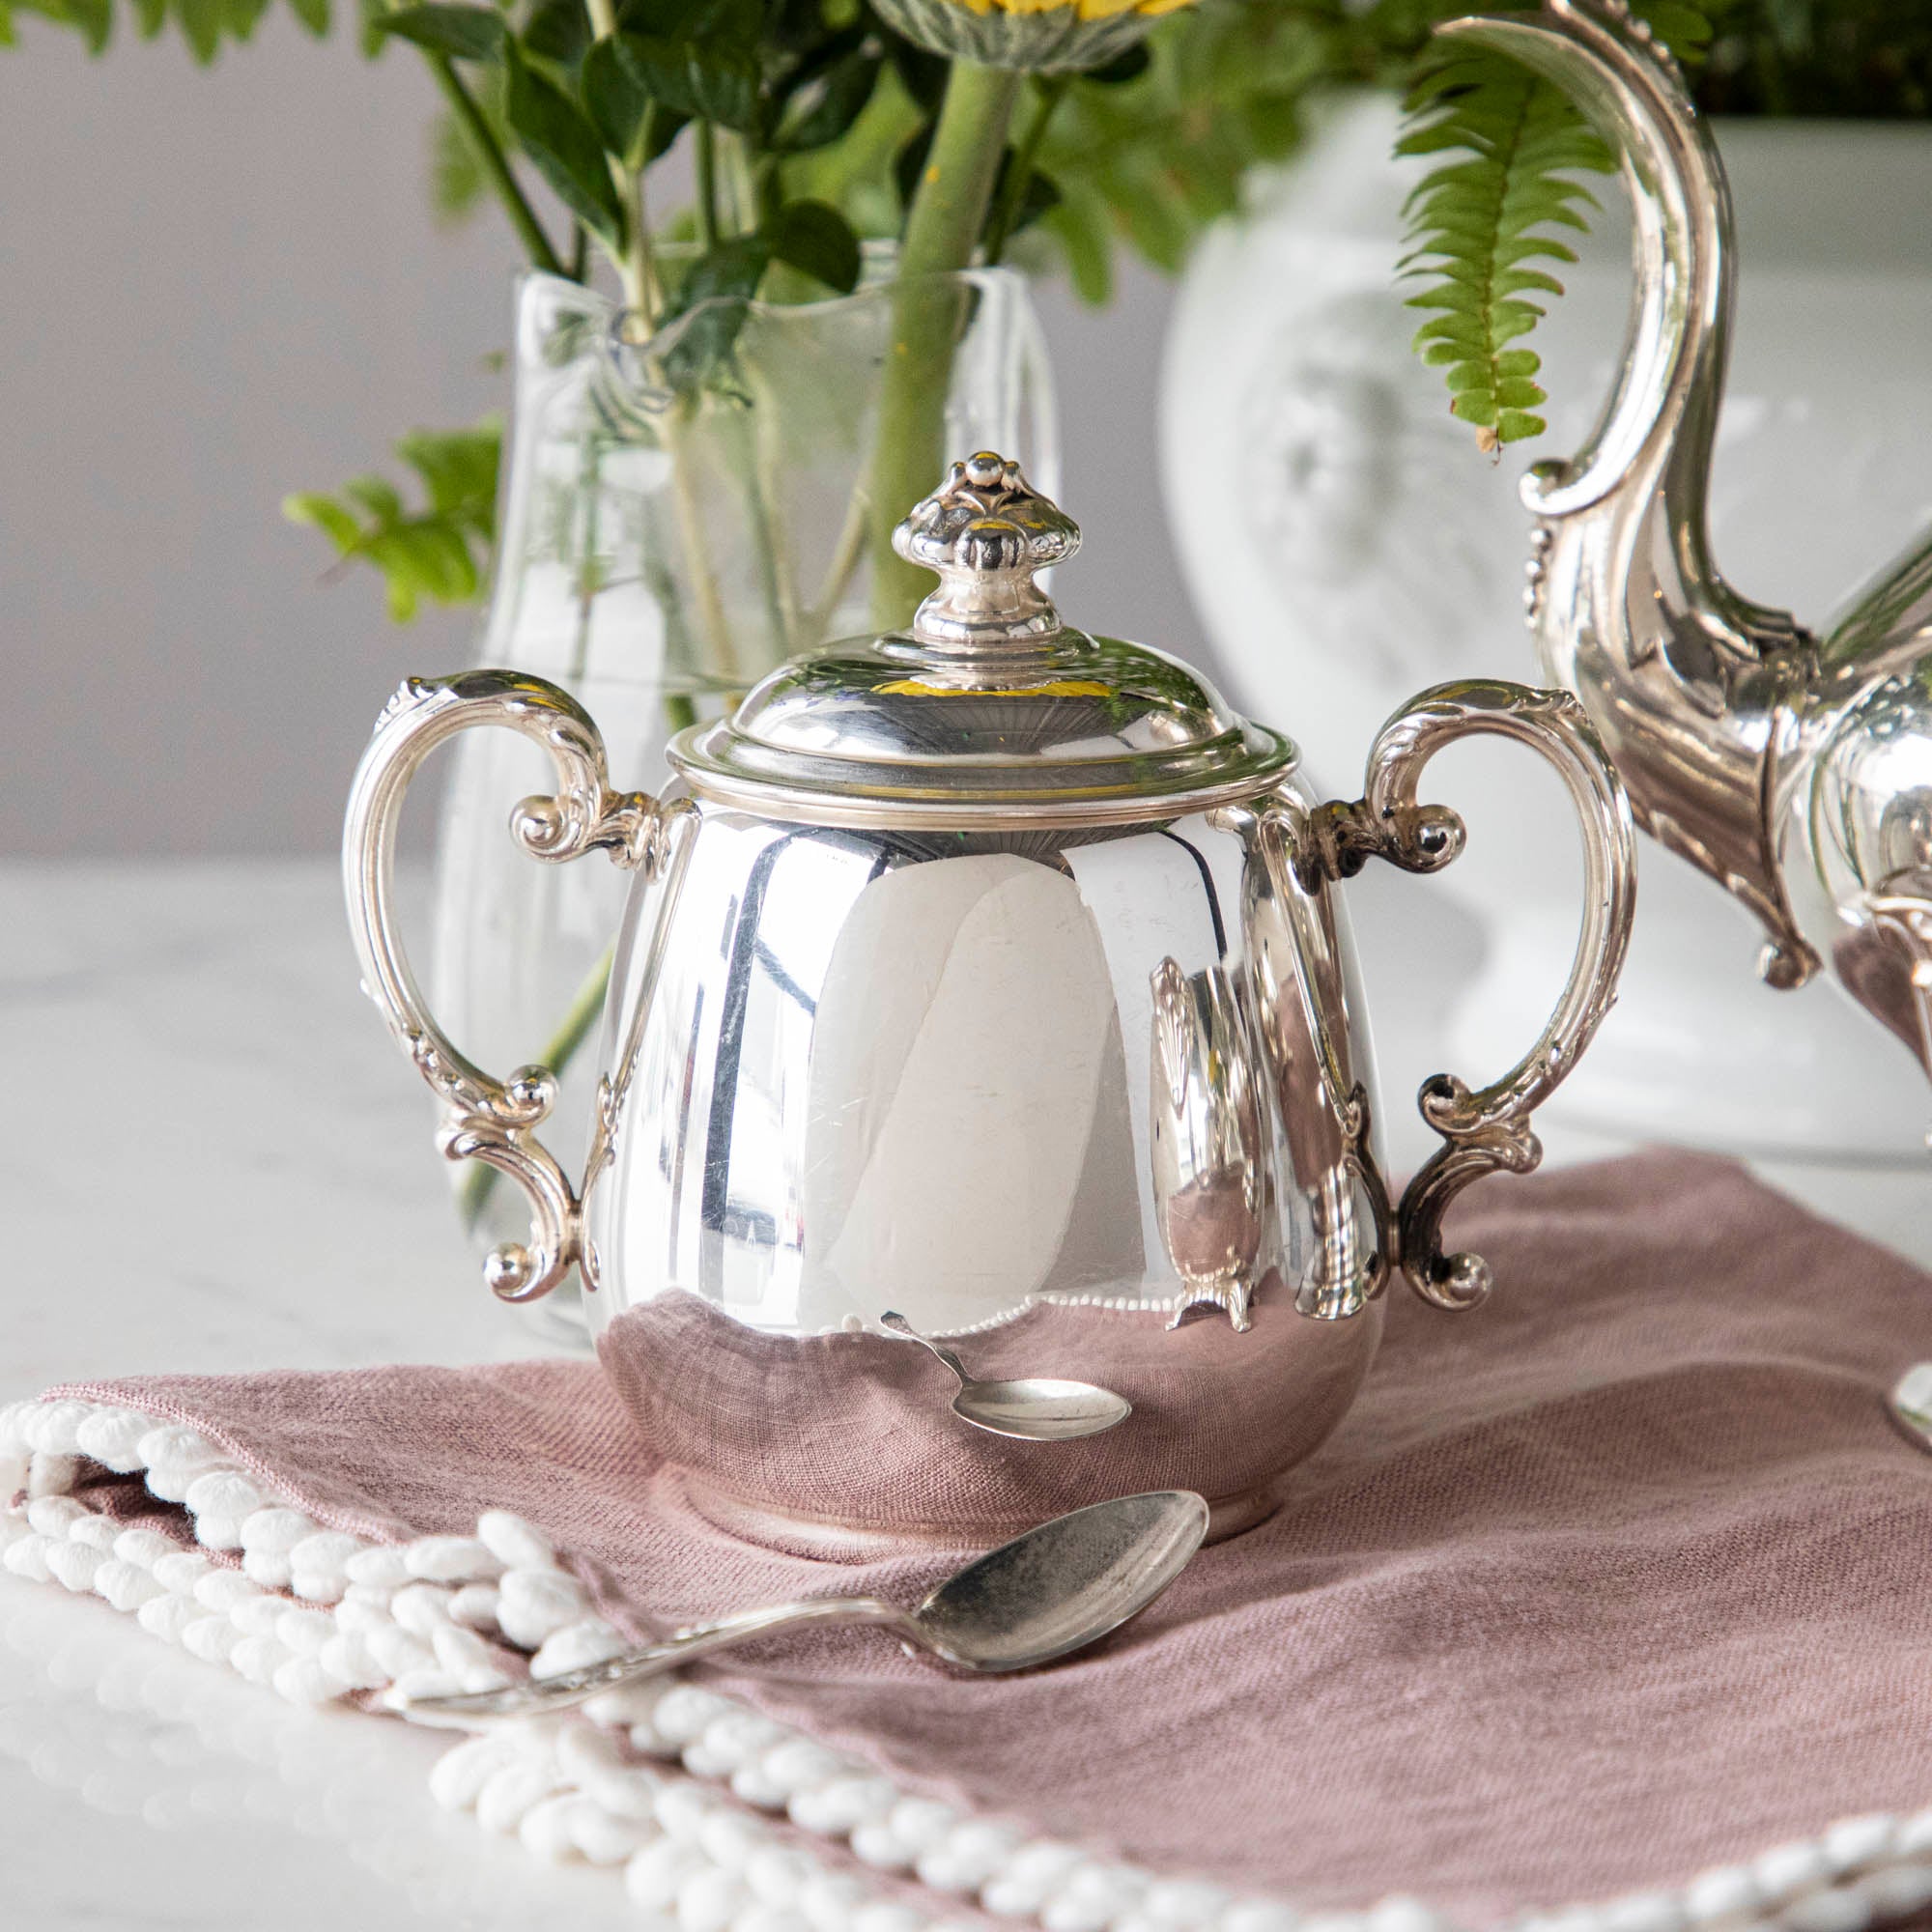 A Hester &amp; Cook vintage silver-plate sugar bowl on a pink tablecloth.